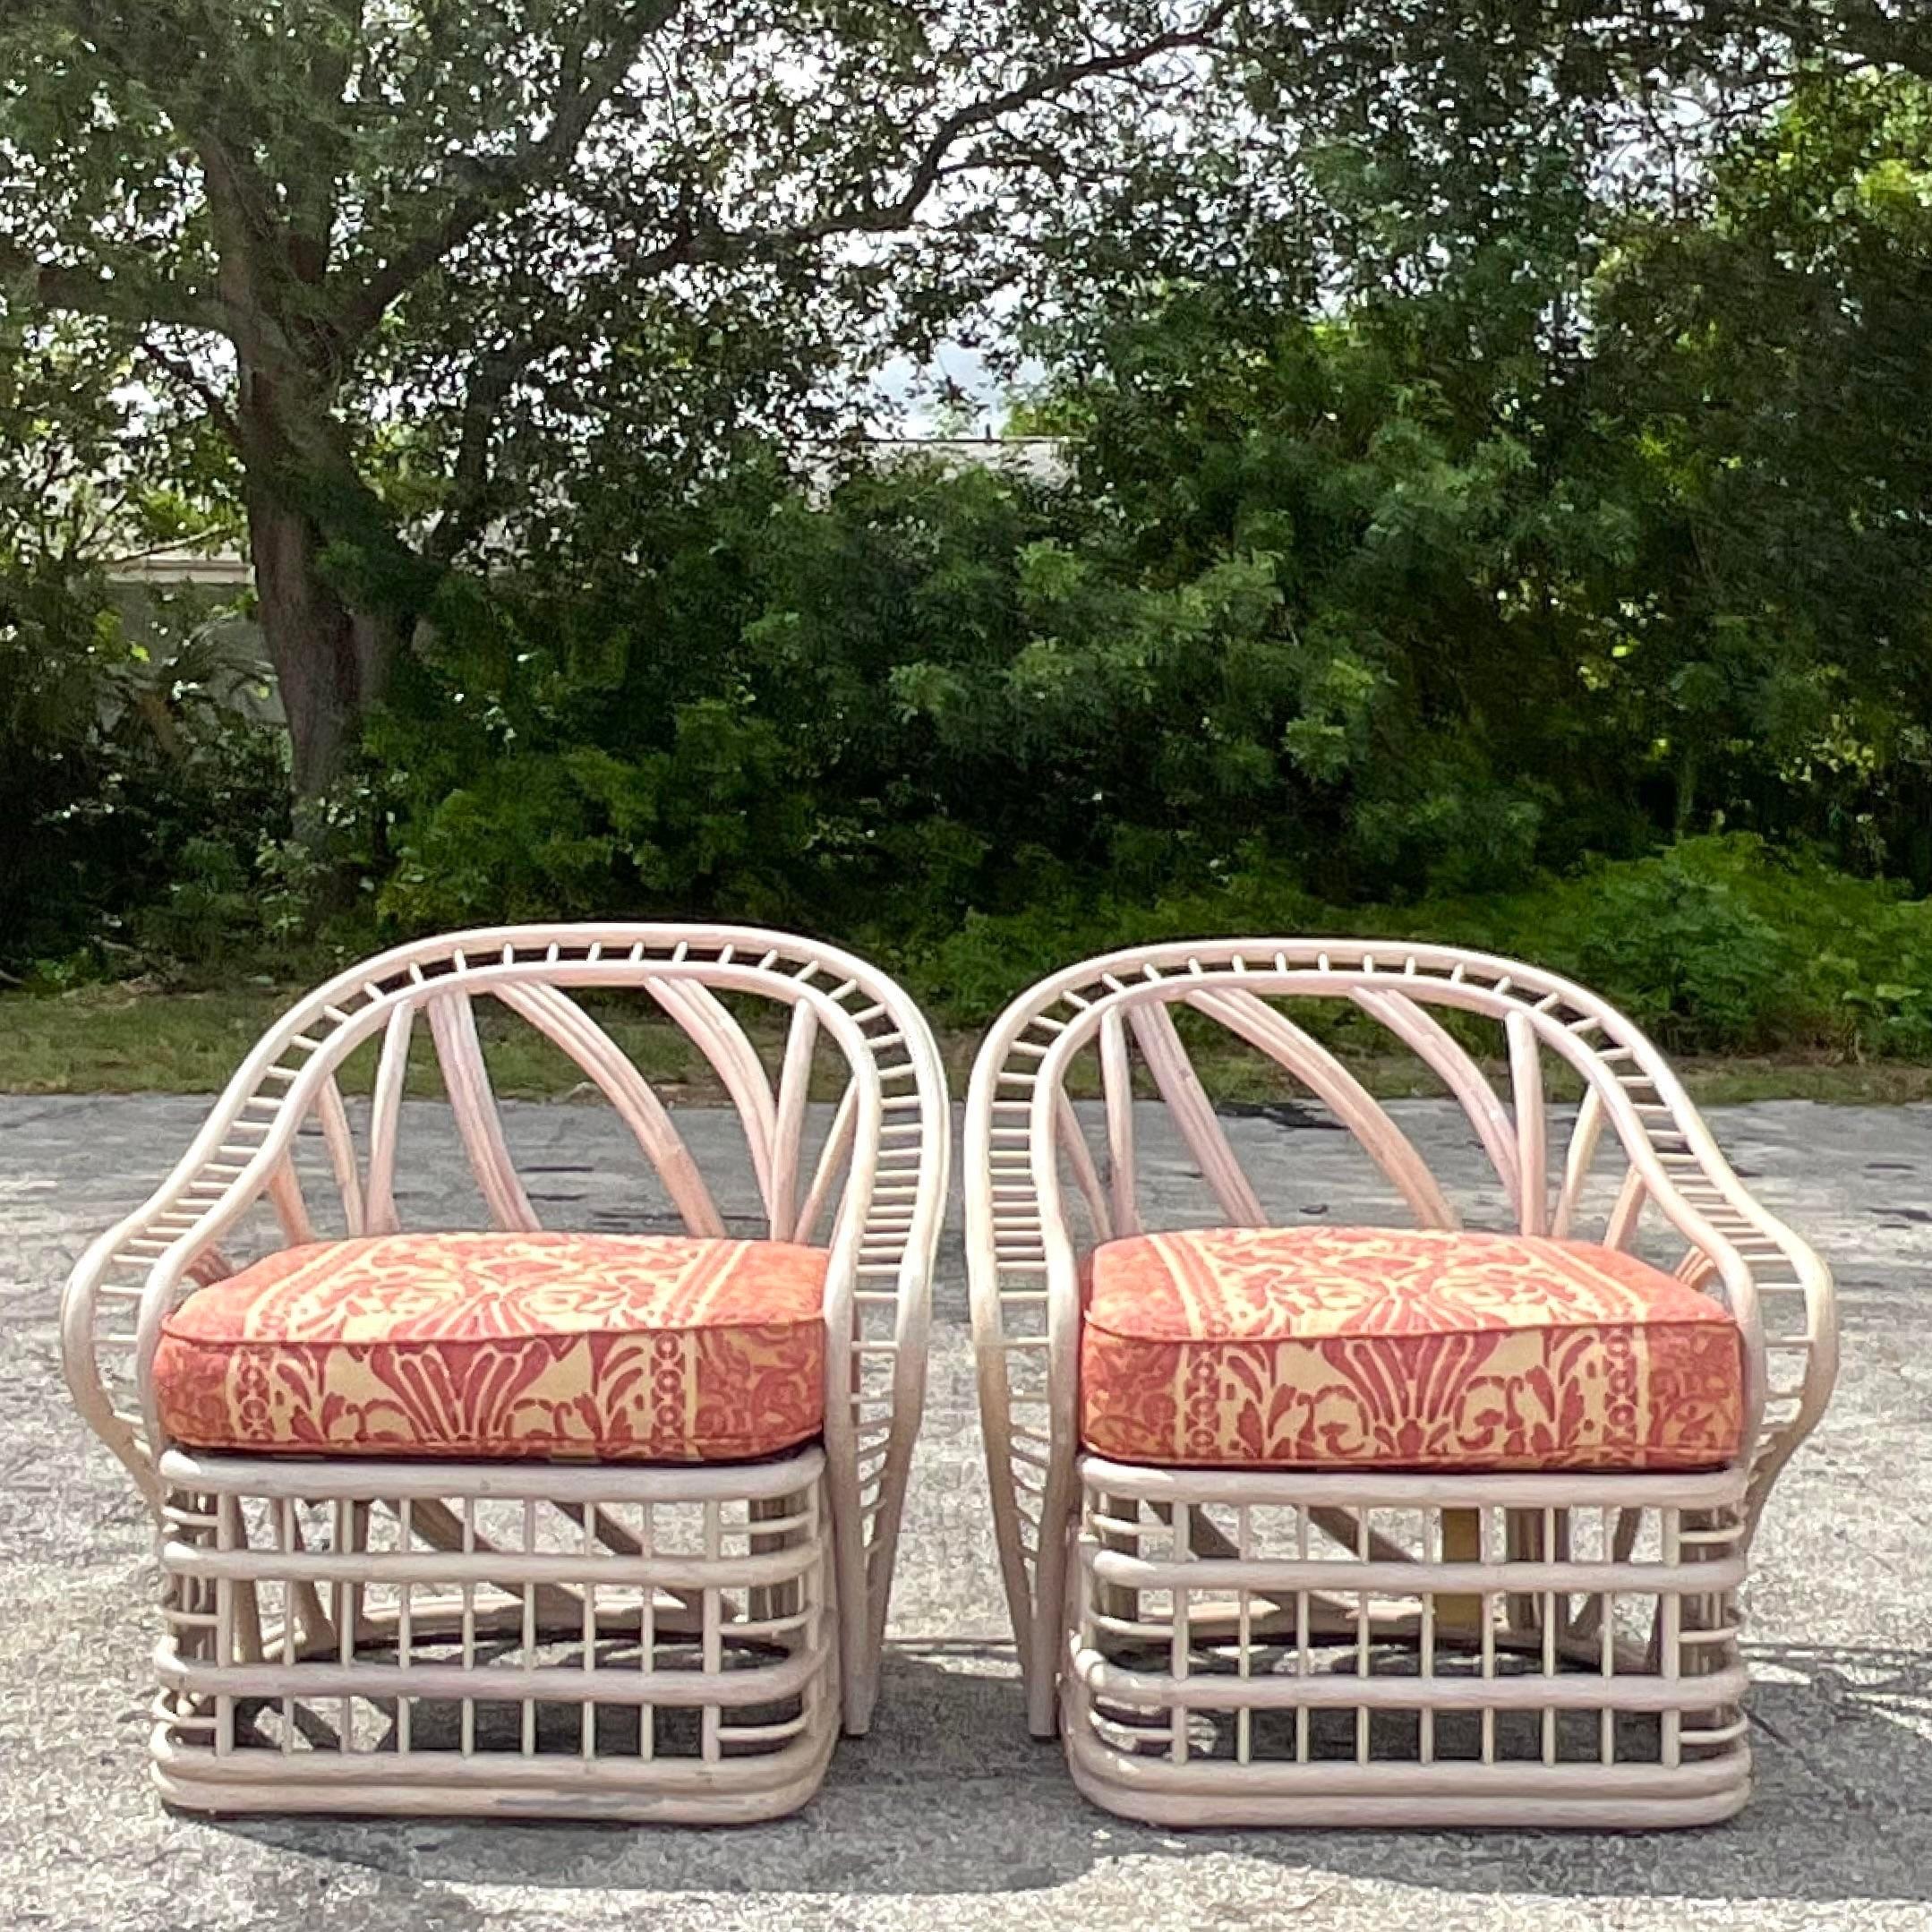 A fabulous pair of vintage Coastal lounge chairs. A chic cerused bent rattan in a dynamic fluid design. Rare and unusual. Acquired from a Palm Beach estate.